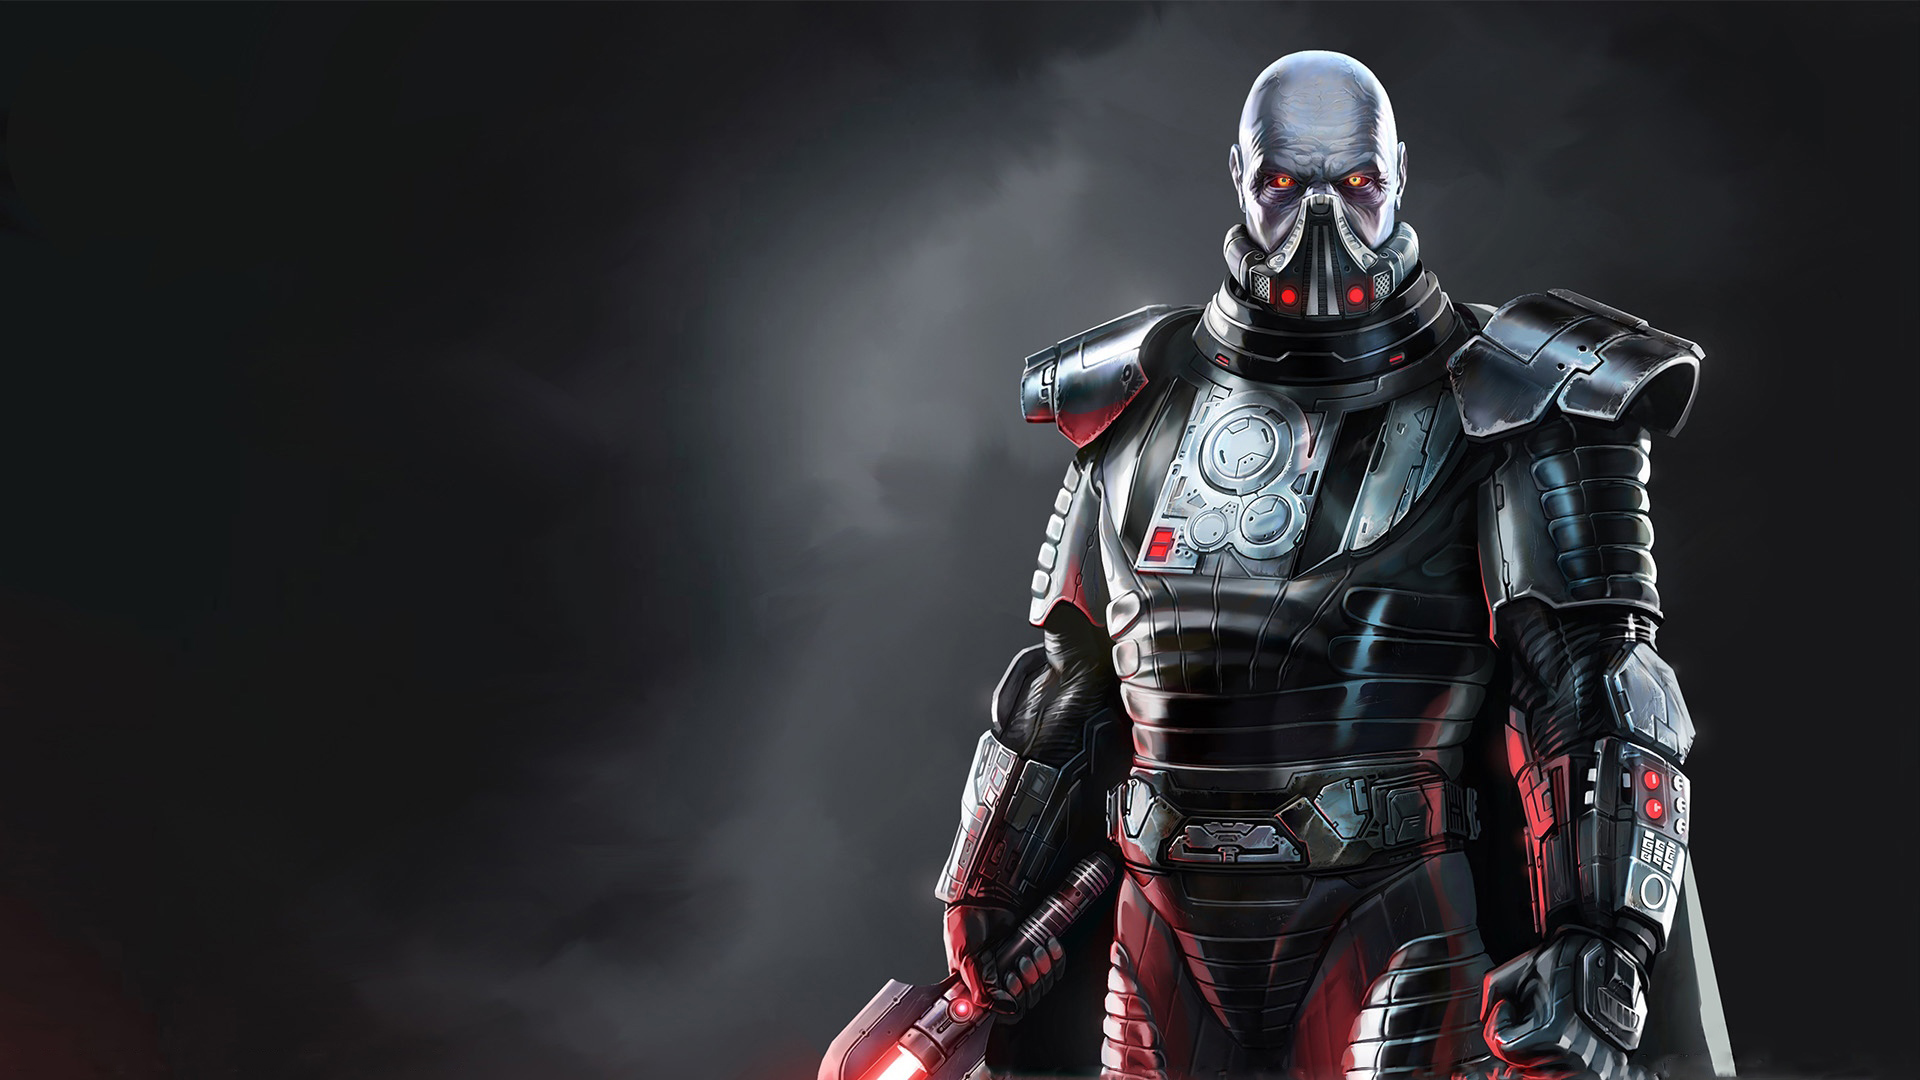 1920x1080  1920x1080 star wars old republic hd wallpaper free hd  widescreen  Coolwallpapersme